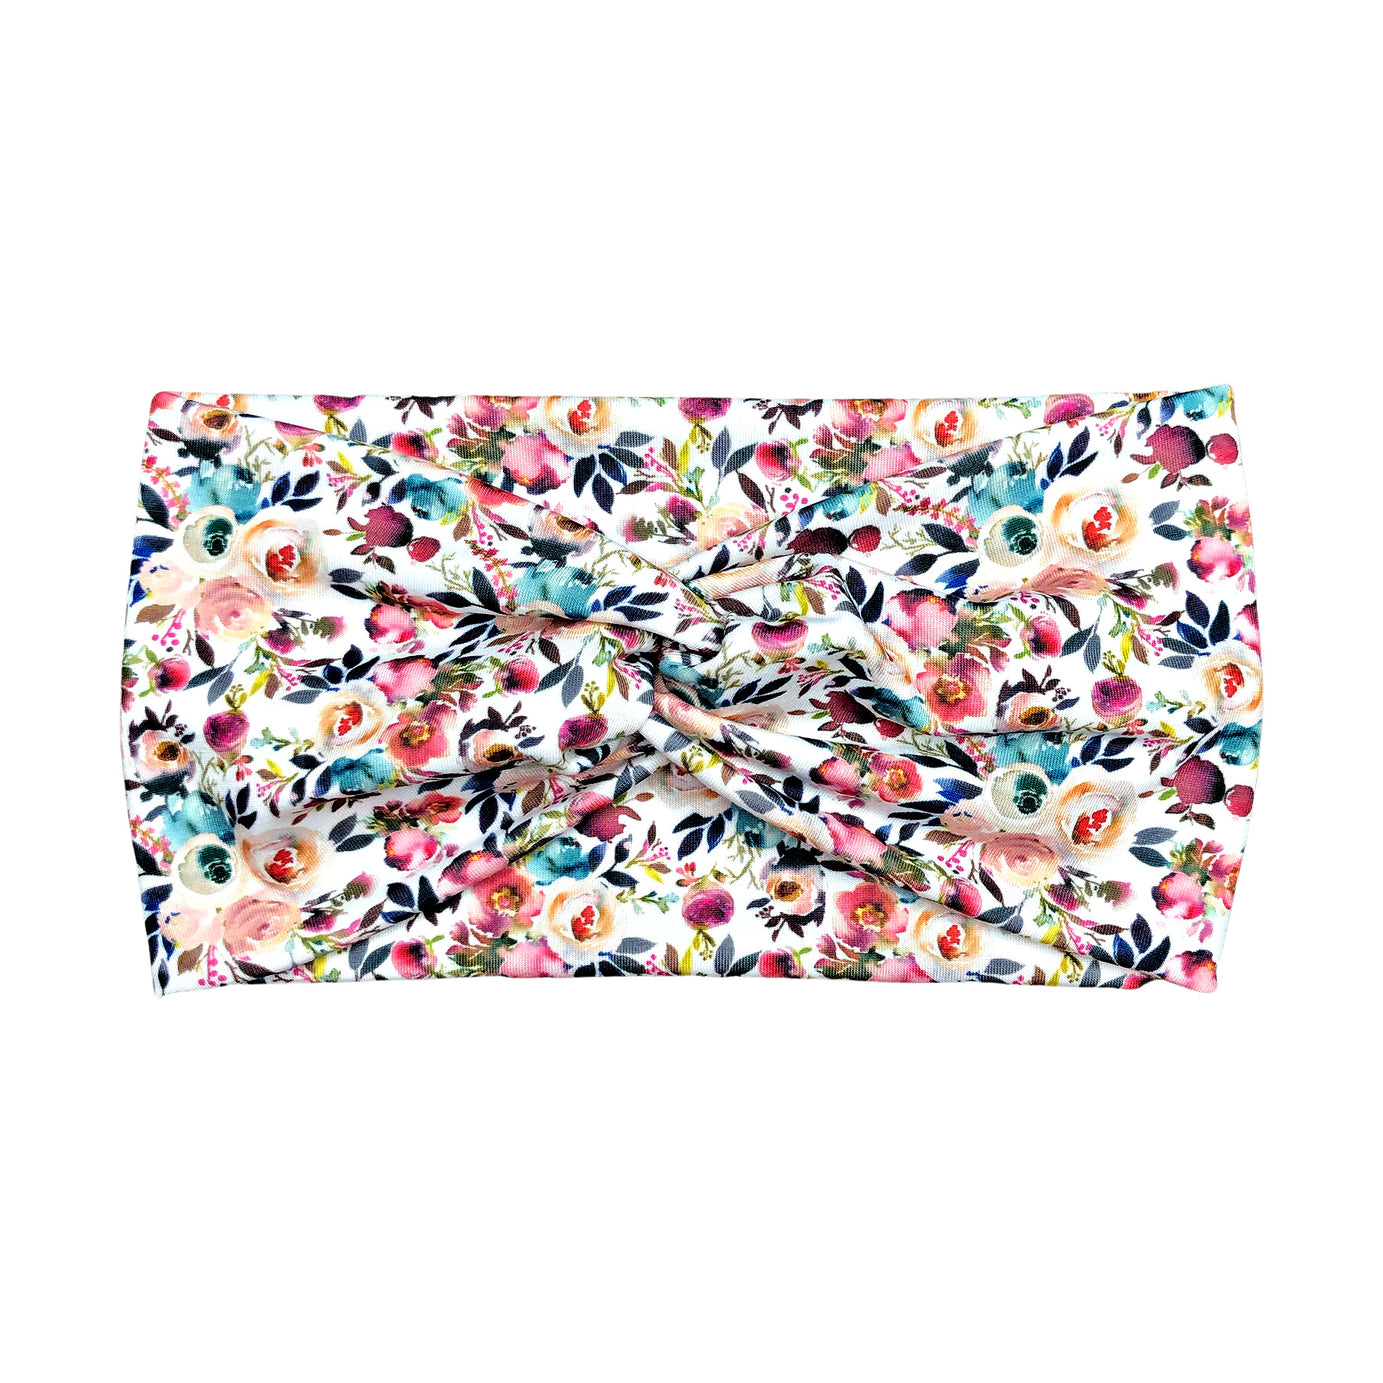 Wide Peach Floral Headband for Women